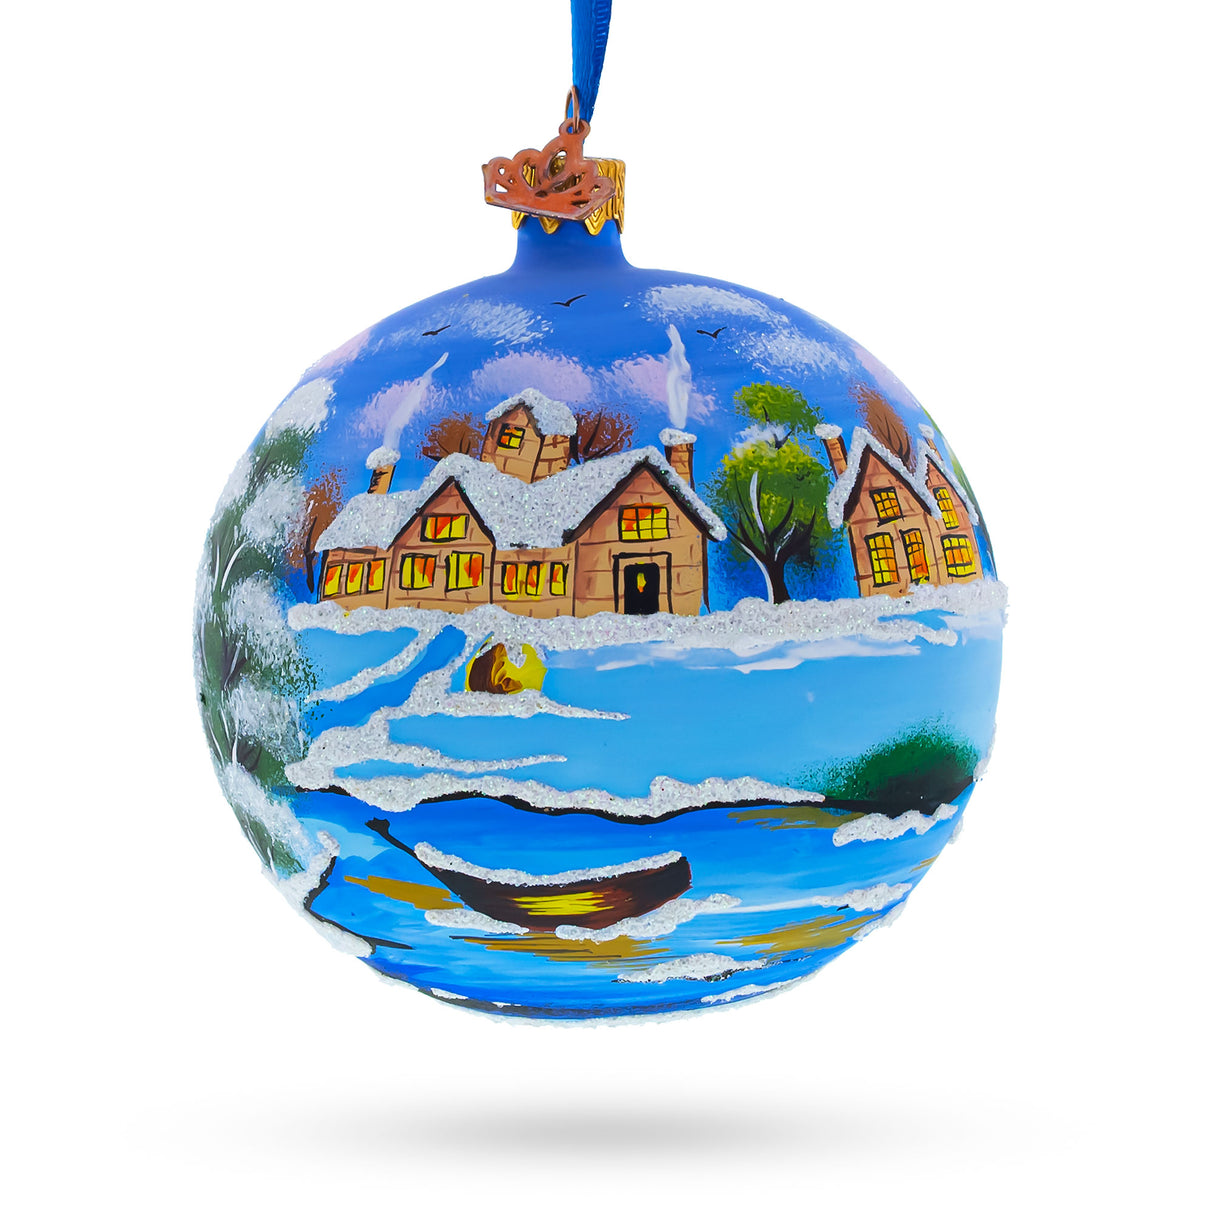 Glass Serene Winter Village Scene with Lake - Artisan Blown Glass Ball Christmas Ornament 4 Inches in Blue color Round